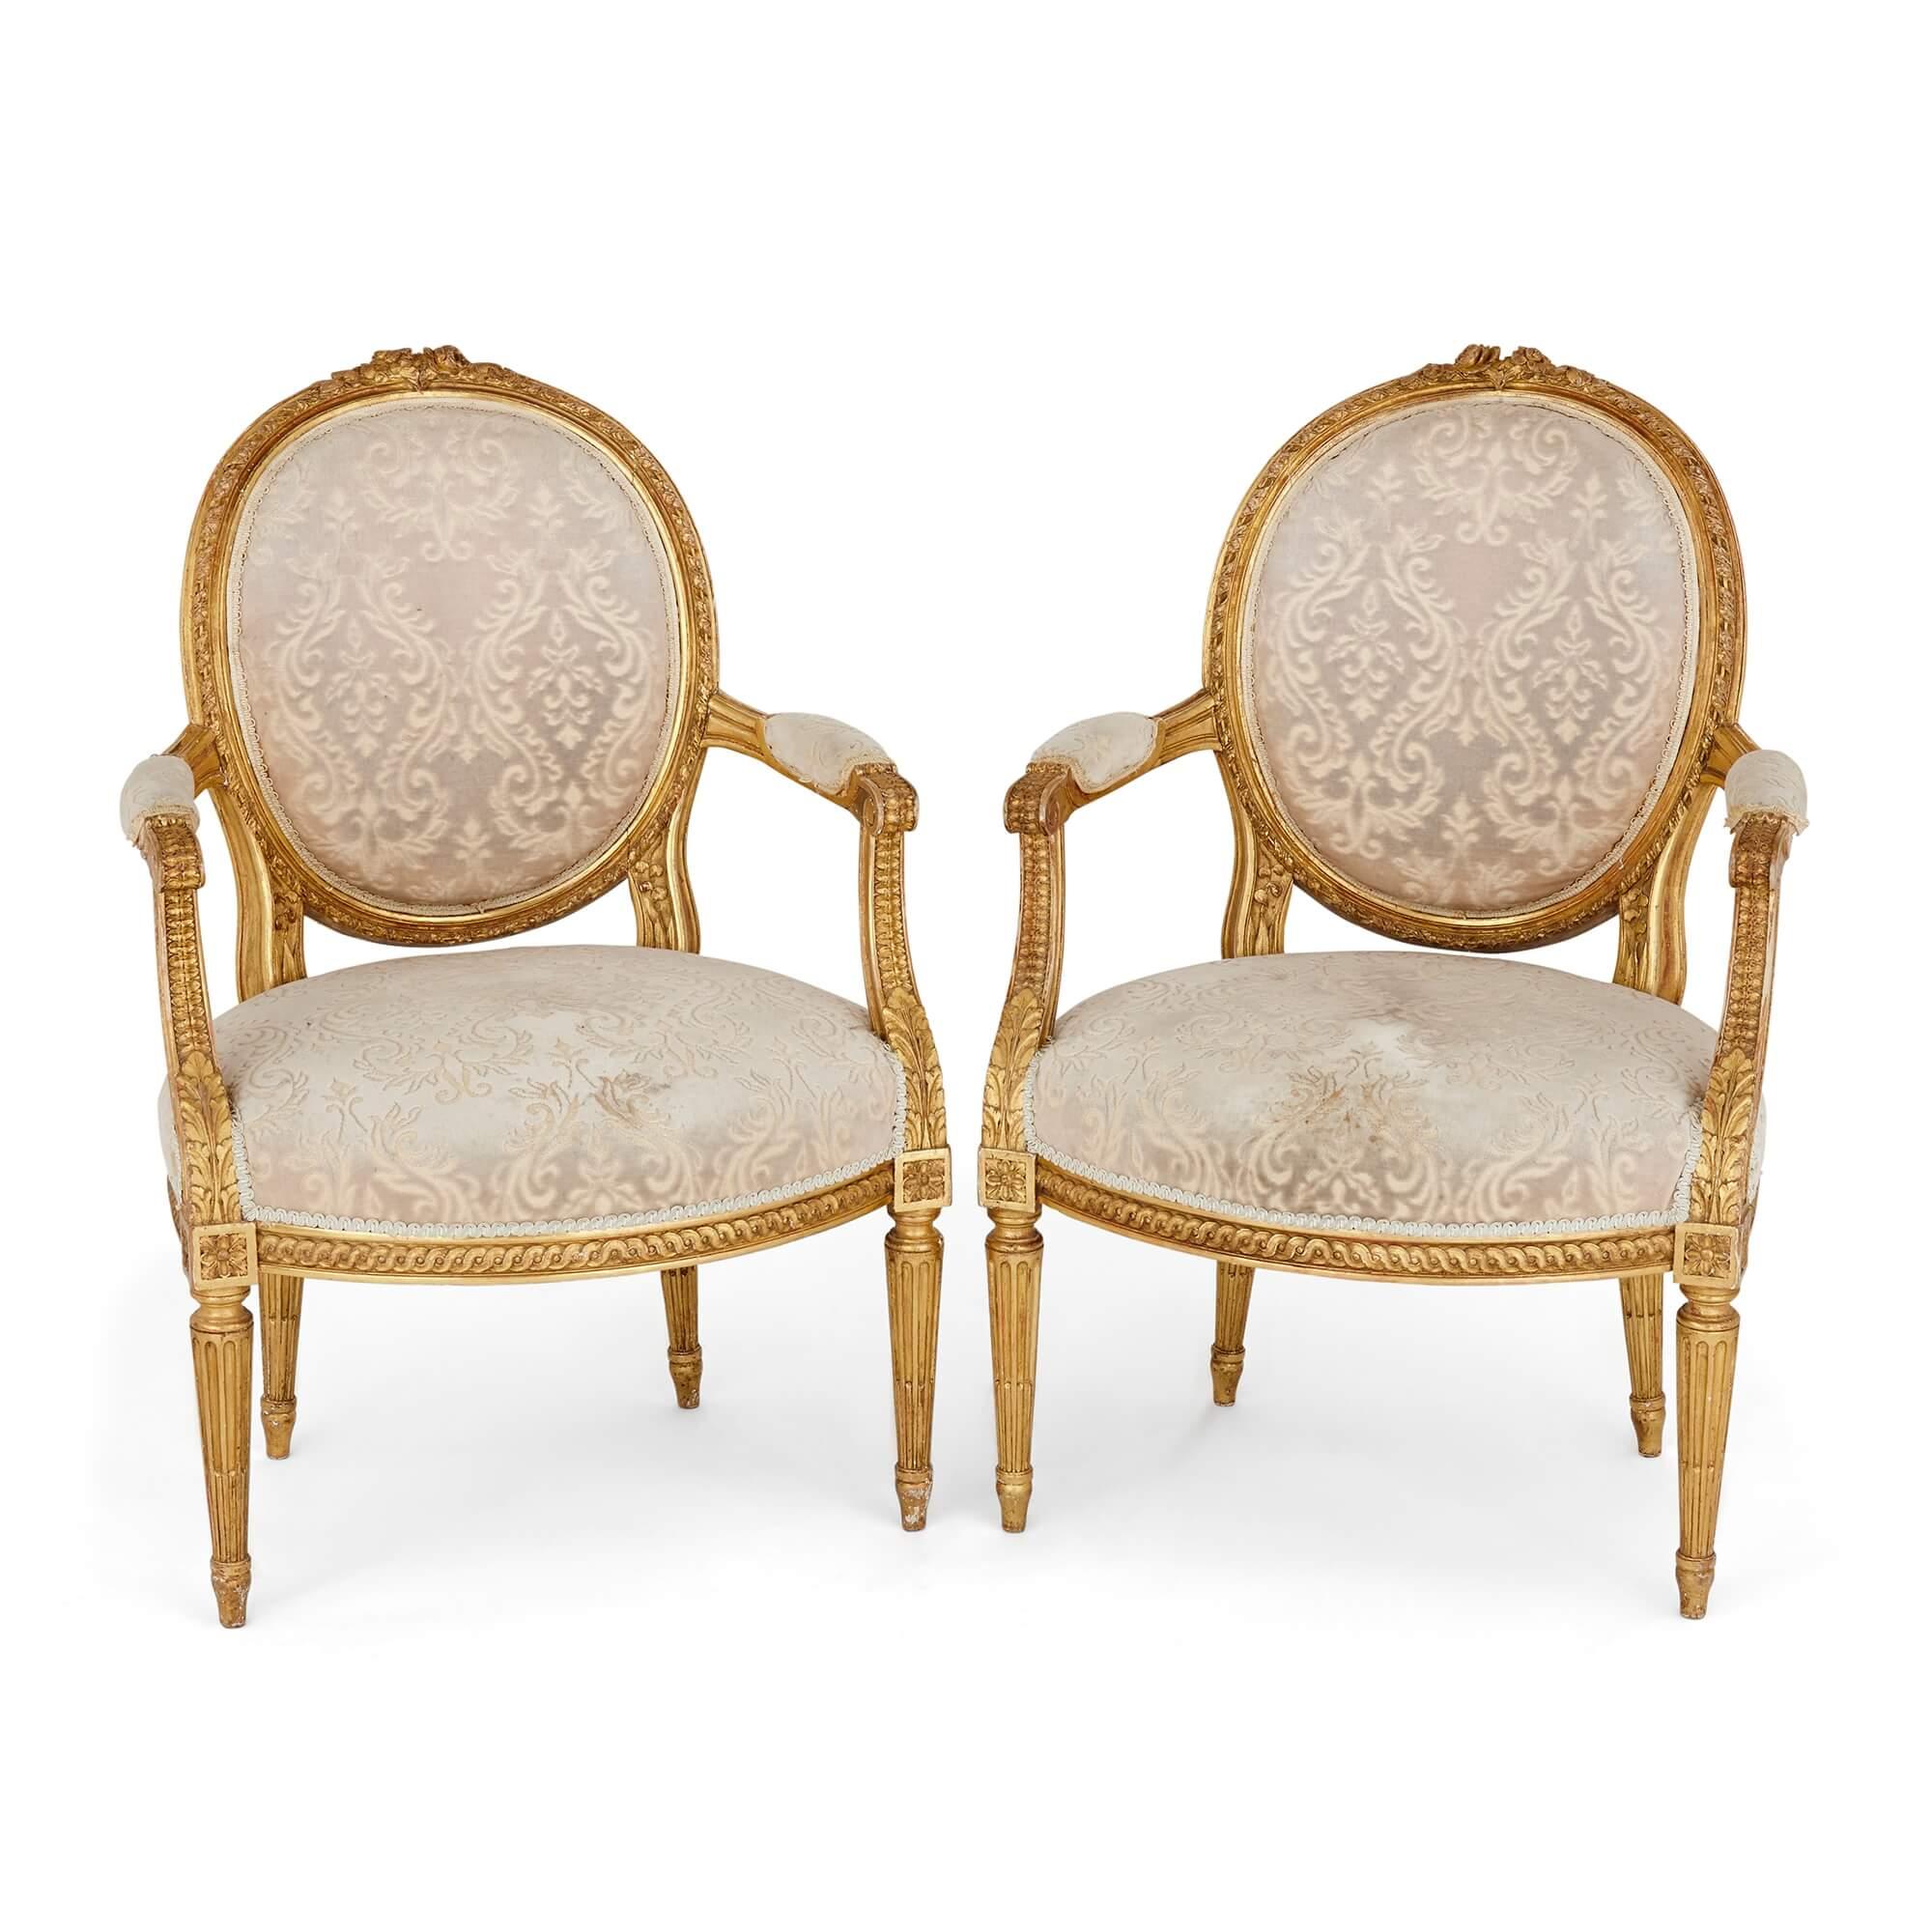 A set of four Louis XVI style giltwood fauteuils
French, Early 20th century
Measures: Height 92cm, width 60cm, depth 55cm

These beautiful fauteuils - armchairs with open sides and upholstered arms, typical of Louis XV and XVI styles - were